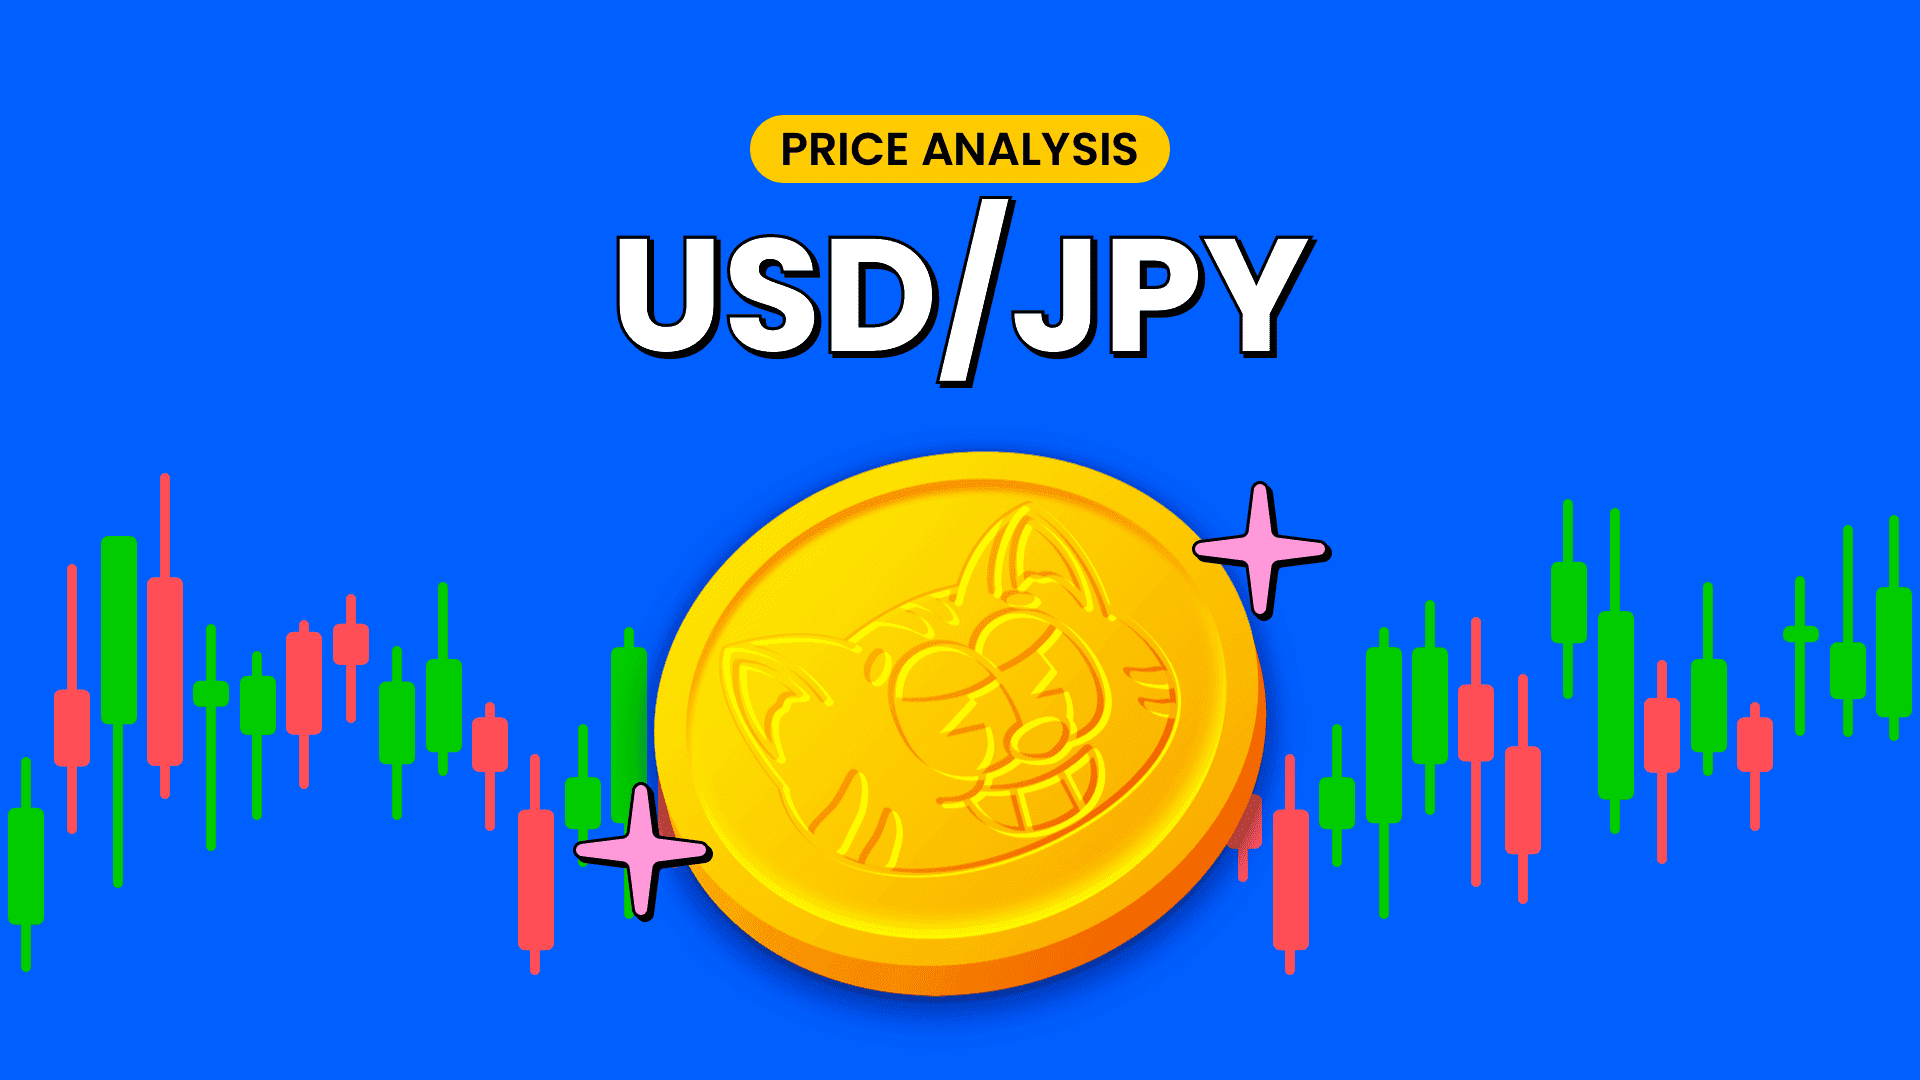 USDJPY-RETREATS-FROM-KEY-RESISTANCE-LEVEL-ON-LOW-USD-DEMAND-Feature-Image-wJR78.png